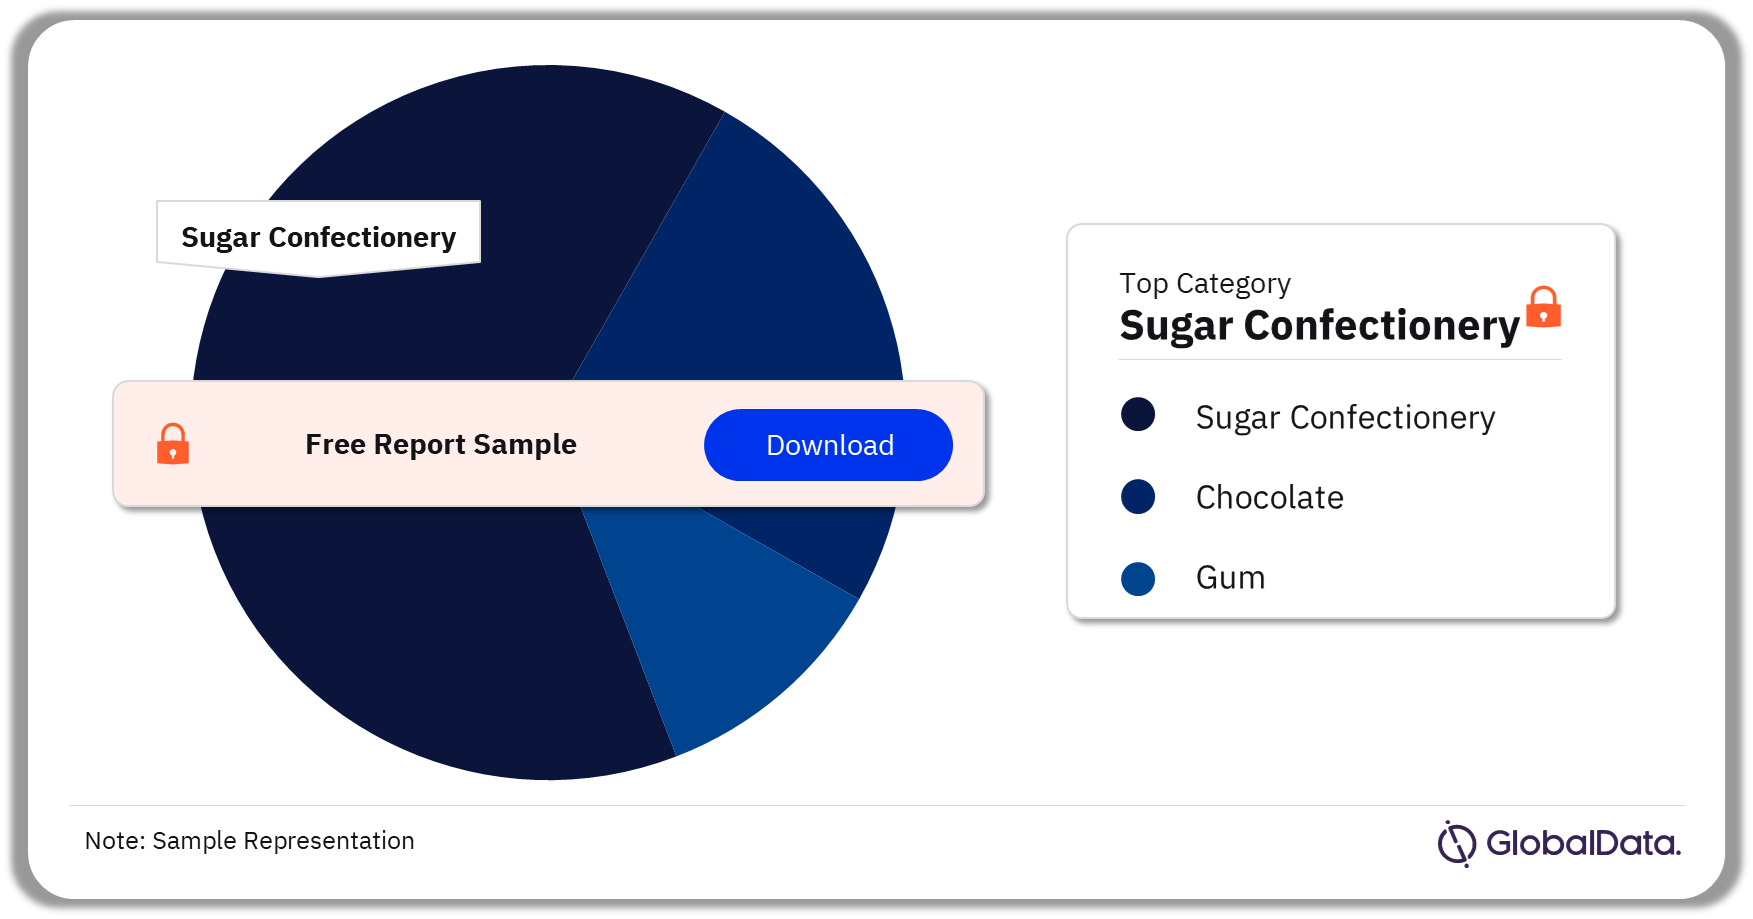 China Confectionery Market Analysis by Categories, 2021 (%)